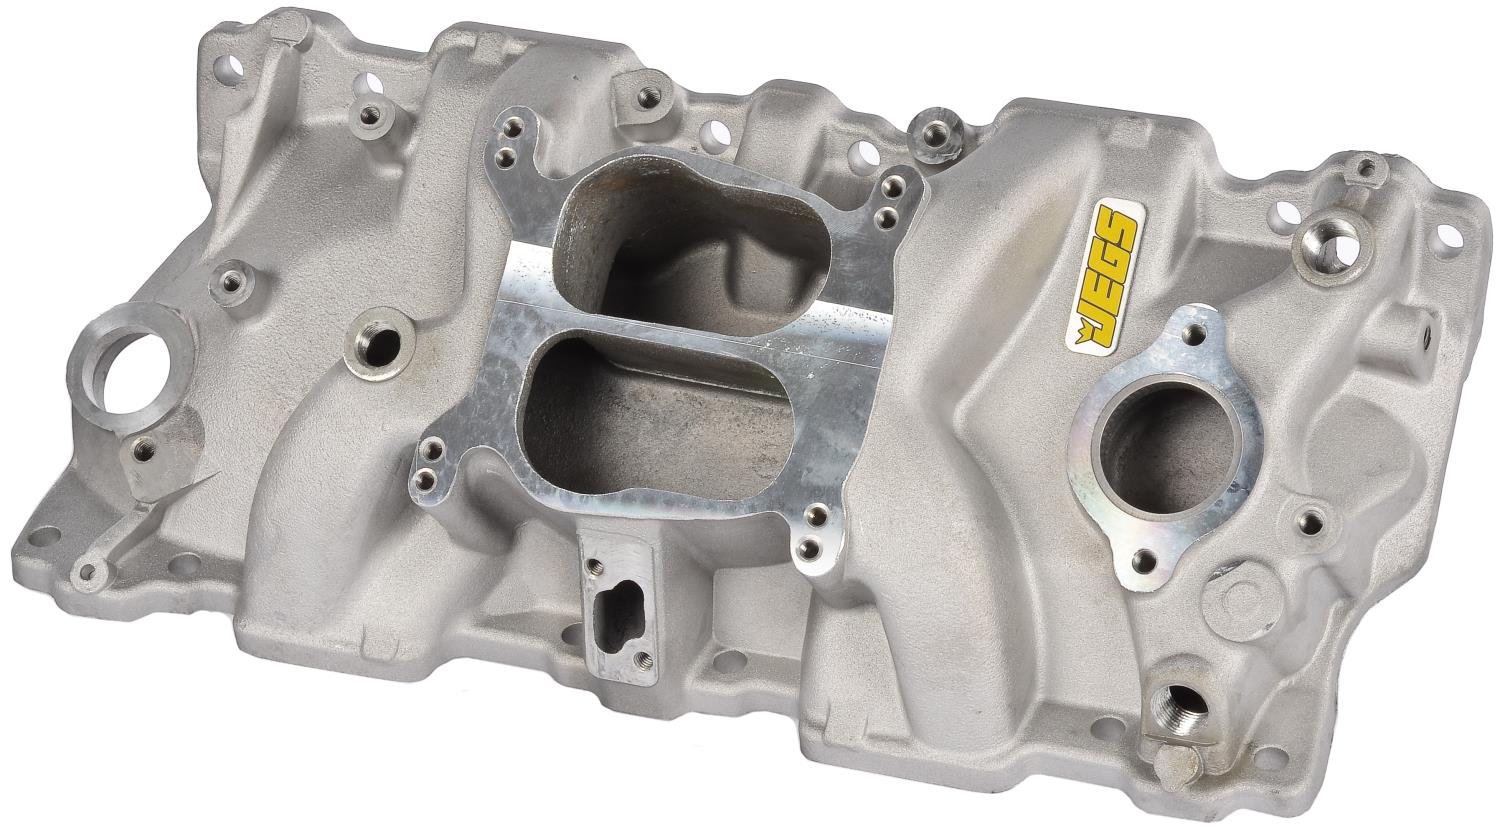 Intake Manifold for 1955-1986 Small Block Chevy 262-400, Dual Plane [Natural]